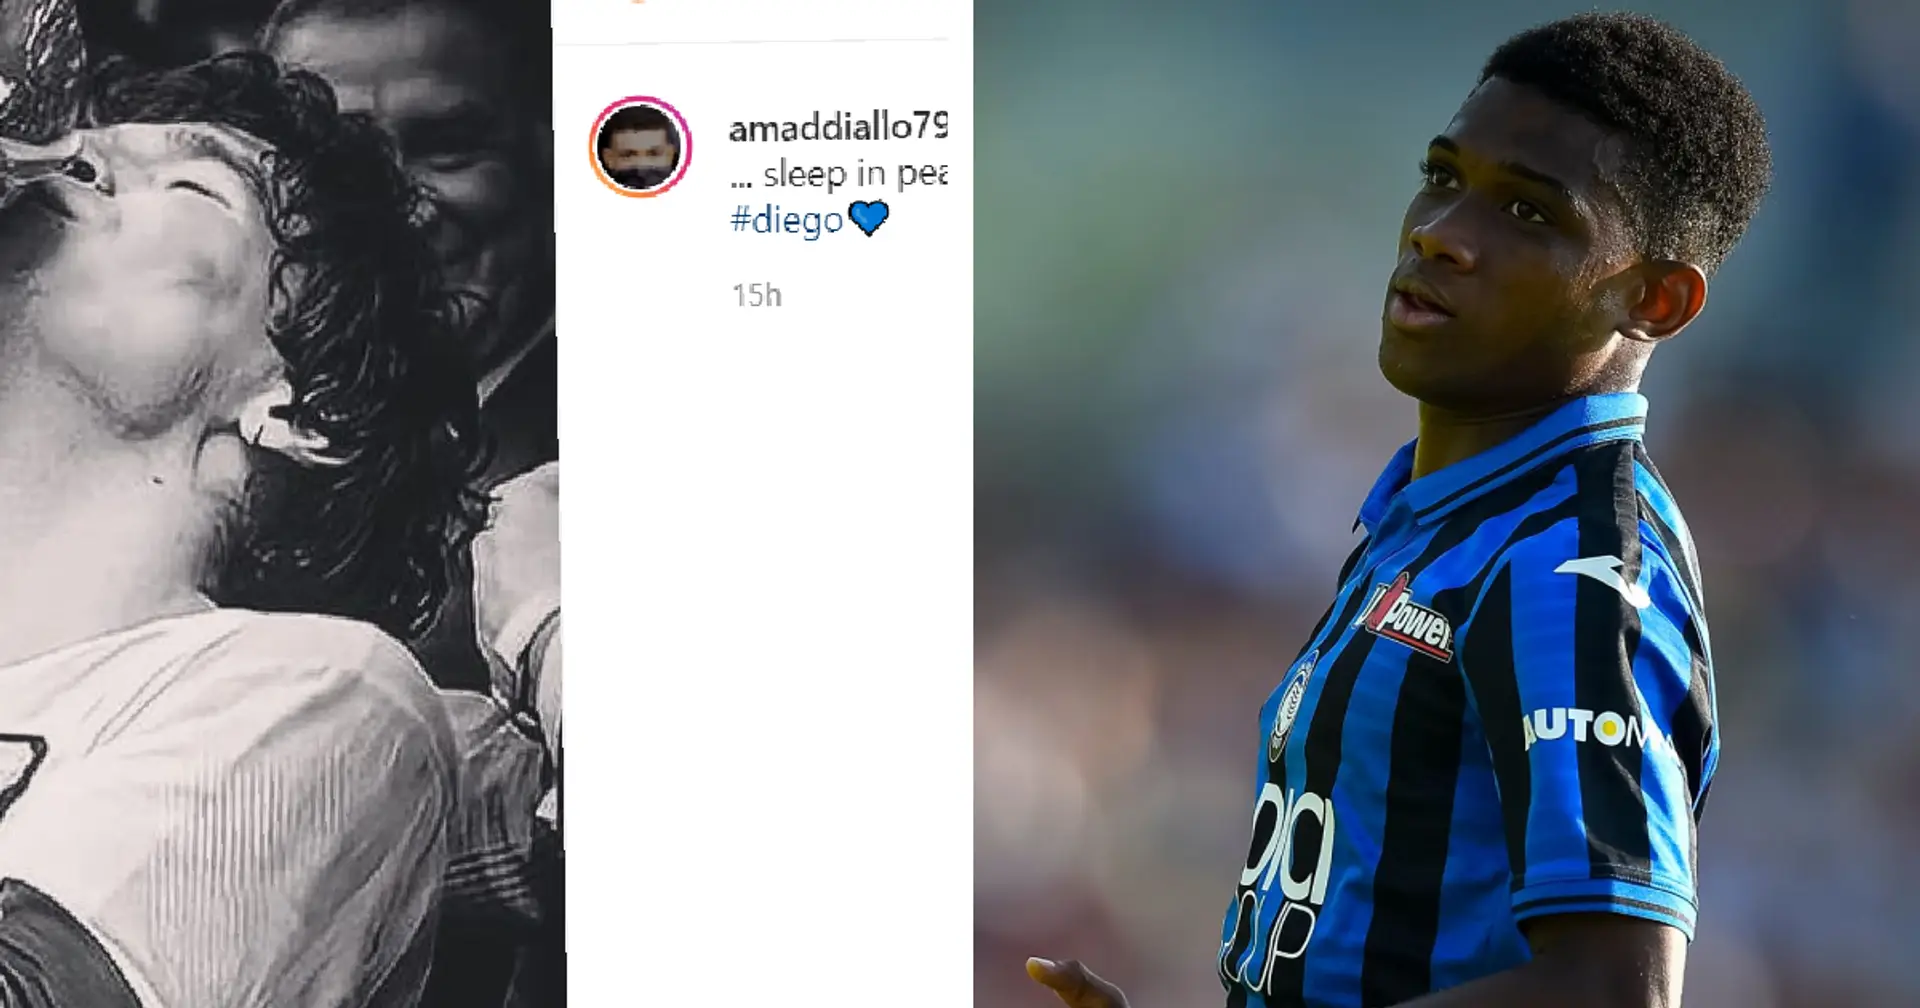 'All is vanity on earth': Amad Diallo shares profound tribute to Diego Maradona